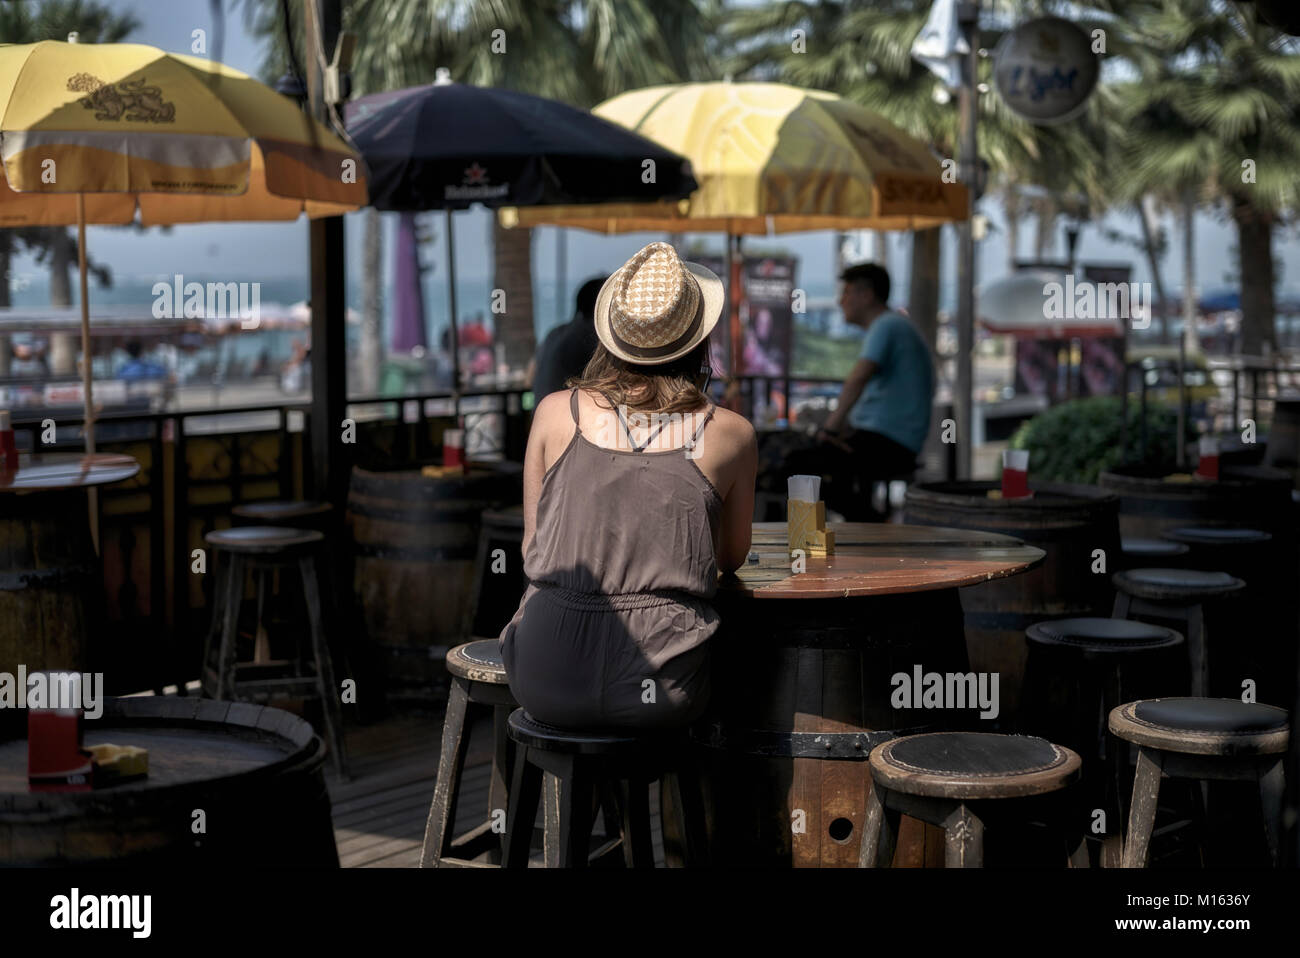 Woman alone in a restaurant bar area. Thailand, Southeast Asia Stock Photo